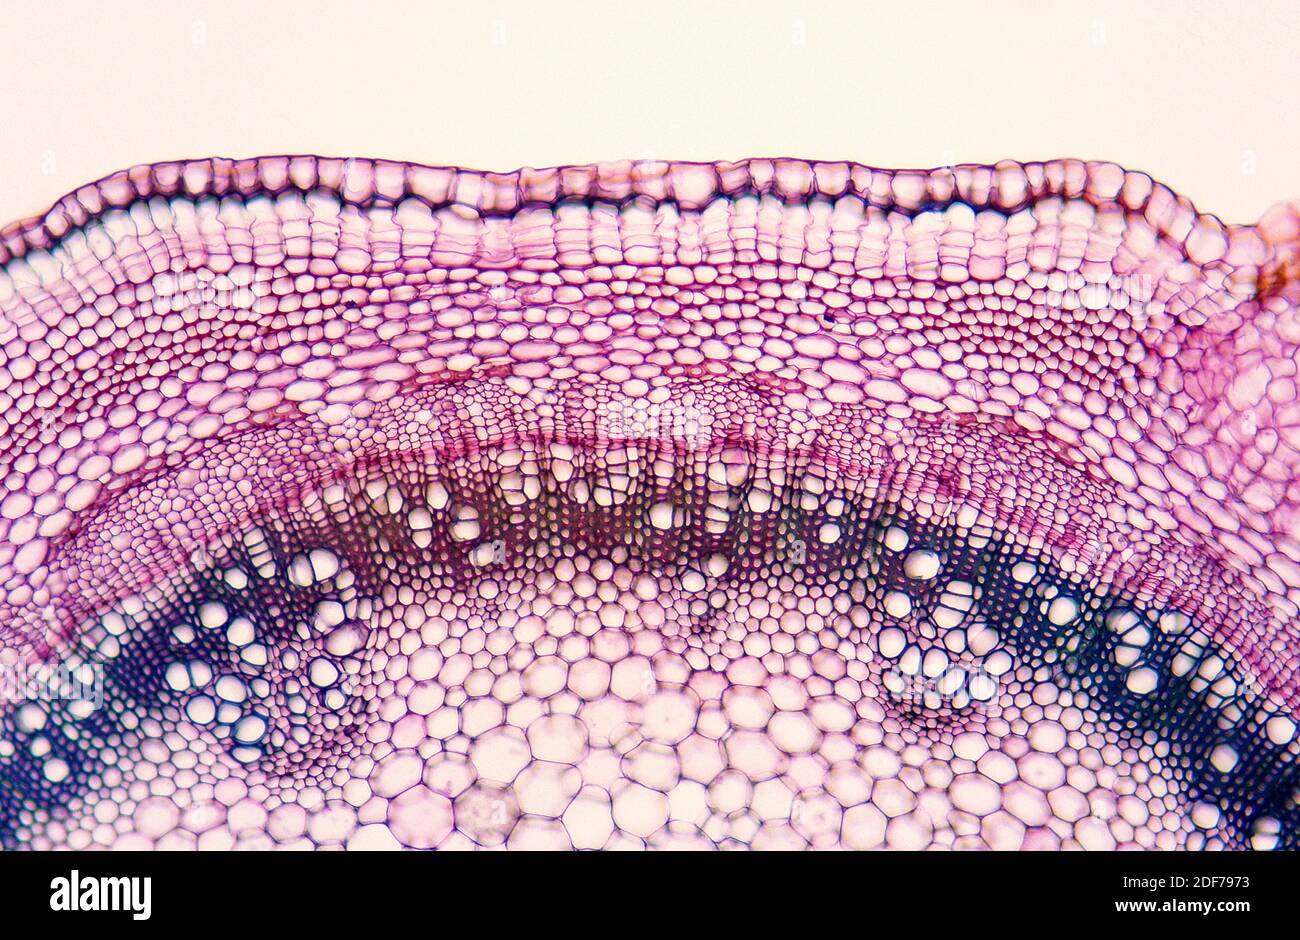 Cambium is a growth tissue of the plants with secondary growth. Is found bettween xylem (above) and phloem (below). Photomicrograph. Stock Photo